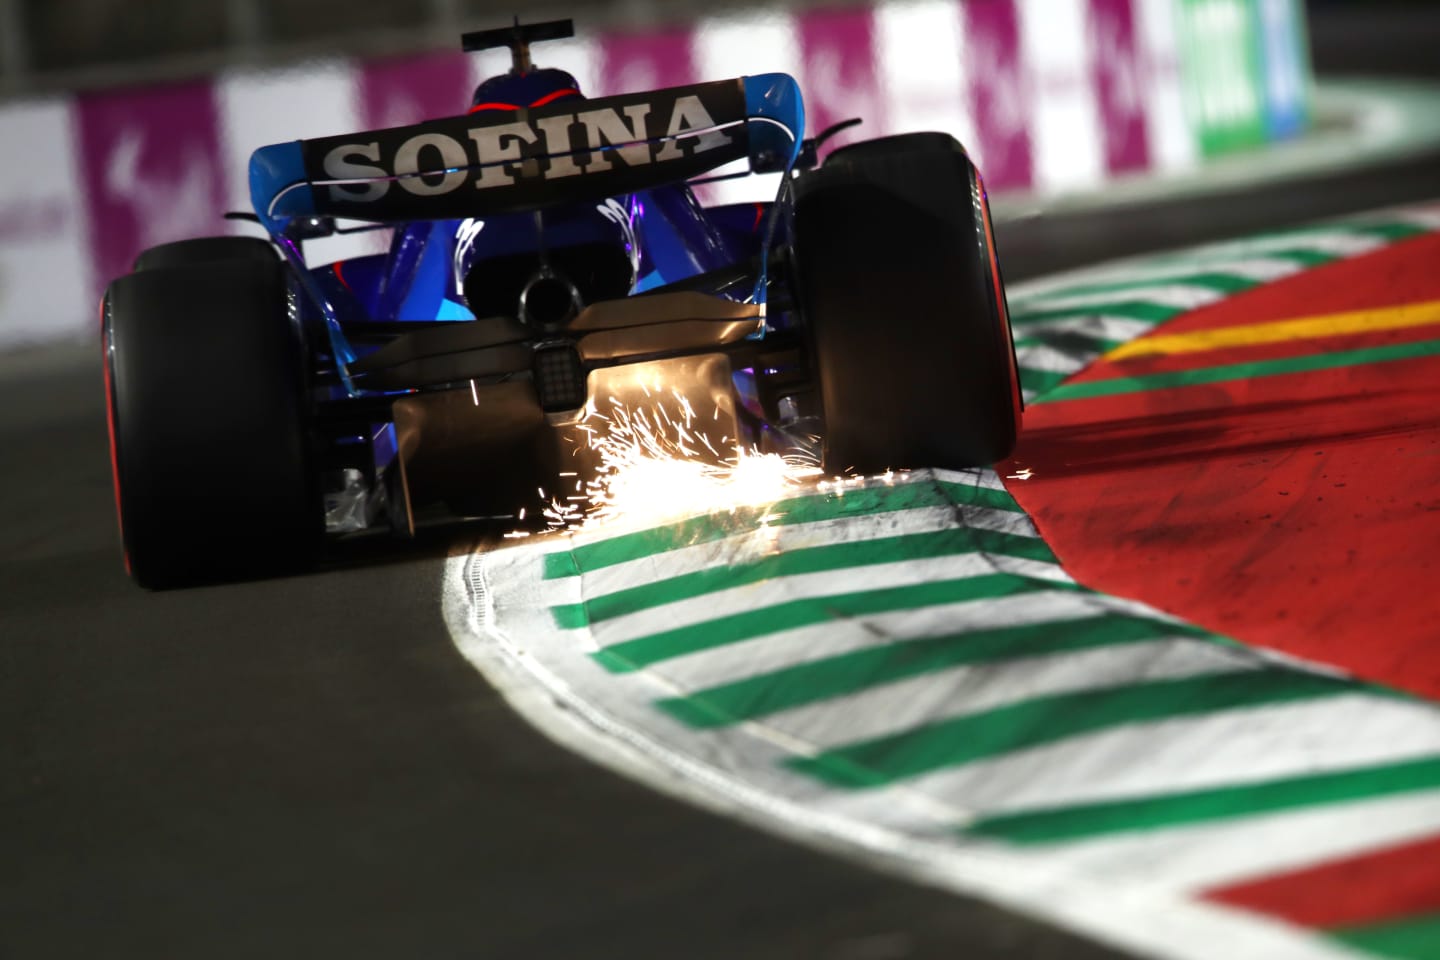 JEDDAH, SAUDI ARABIA - MARCH 26: Sparks fly behind Alexander Albon of Thailand driving the (23) Williams FW44 Mercedes on track during qualifying ahead of the F1 Grand Prix of Saudi Arabia at the Jeddah Corniche Circuit on March 26, 2022 in Jeddah, Saudi Arabia. (Photo by Joe Portlock - Formula 1/Formula 1 via Getty Images)